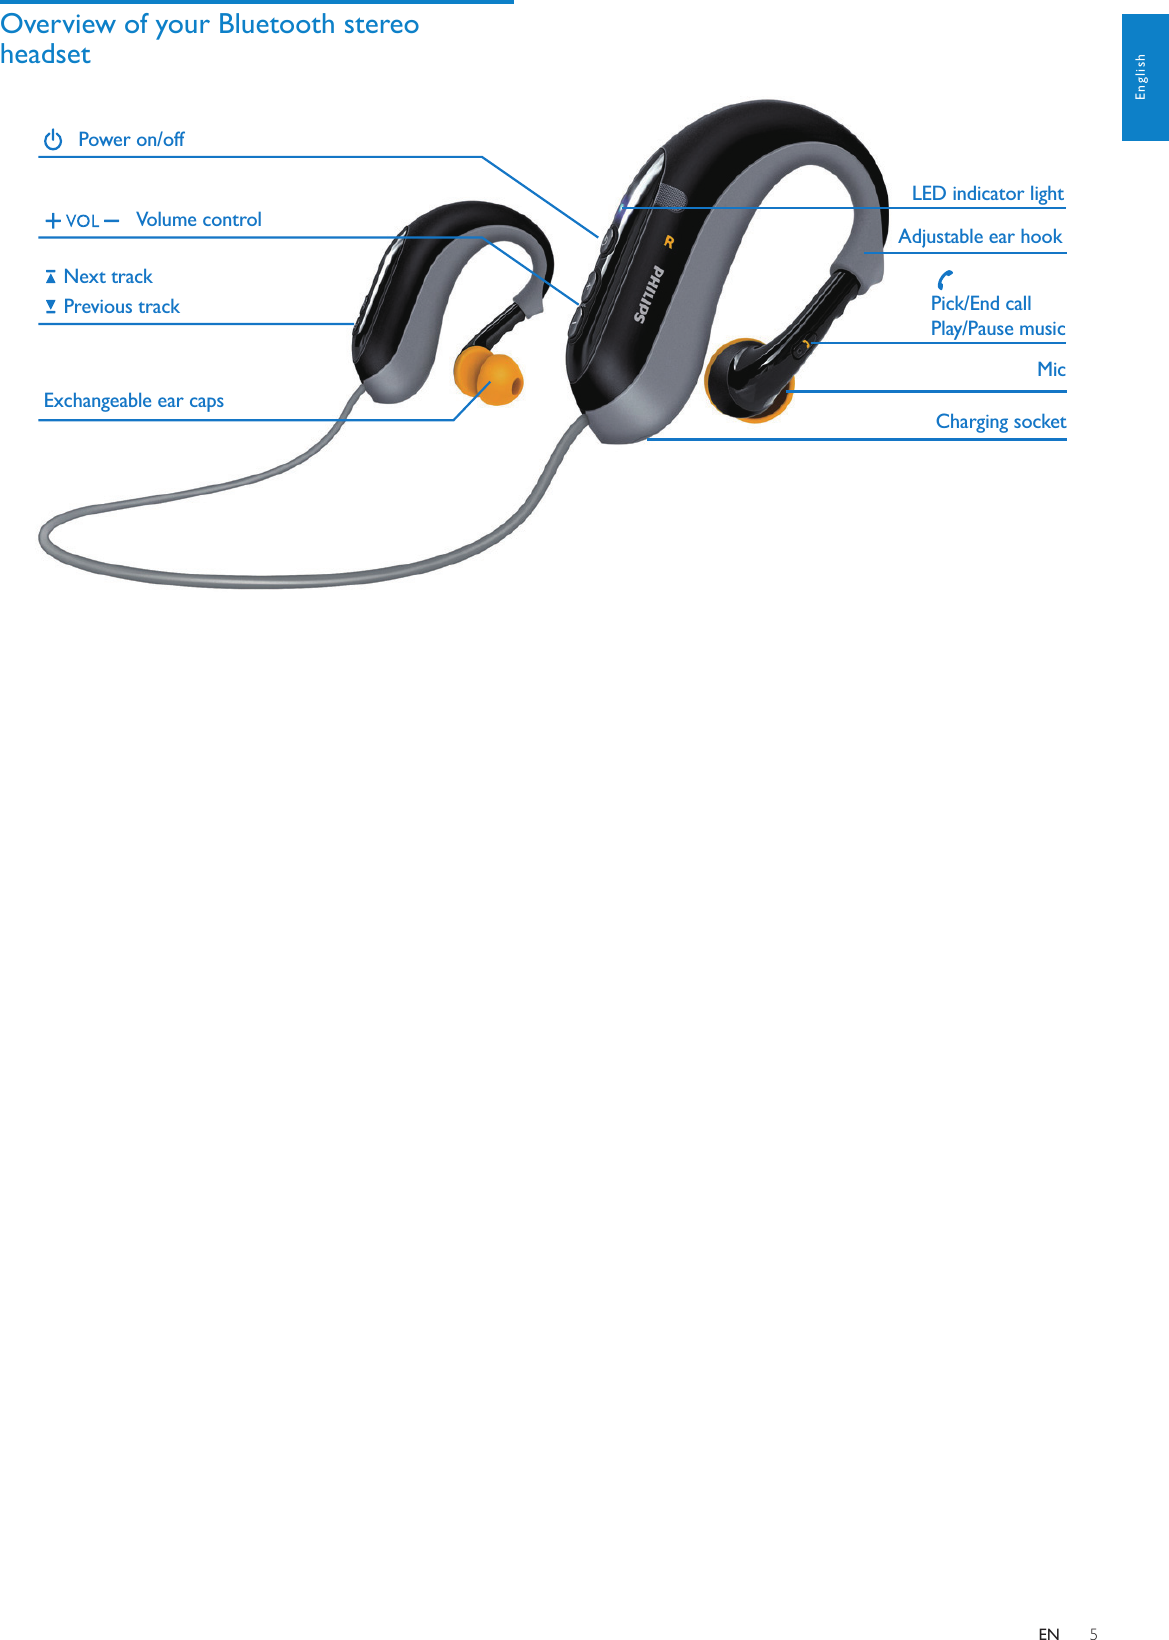 5Overview of your Bluetooth stereo headset Exchangeable ear capsNext trackPower on/offVolume controlPrevious trackMicLED indicator lightAdjustable ear hookPick/End callPlay/Pause musicCharging socketEnglishEN